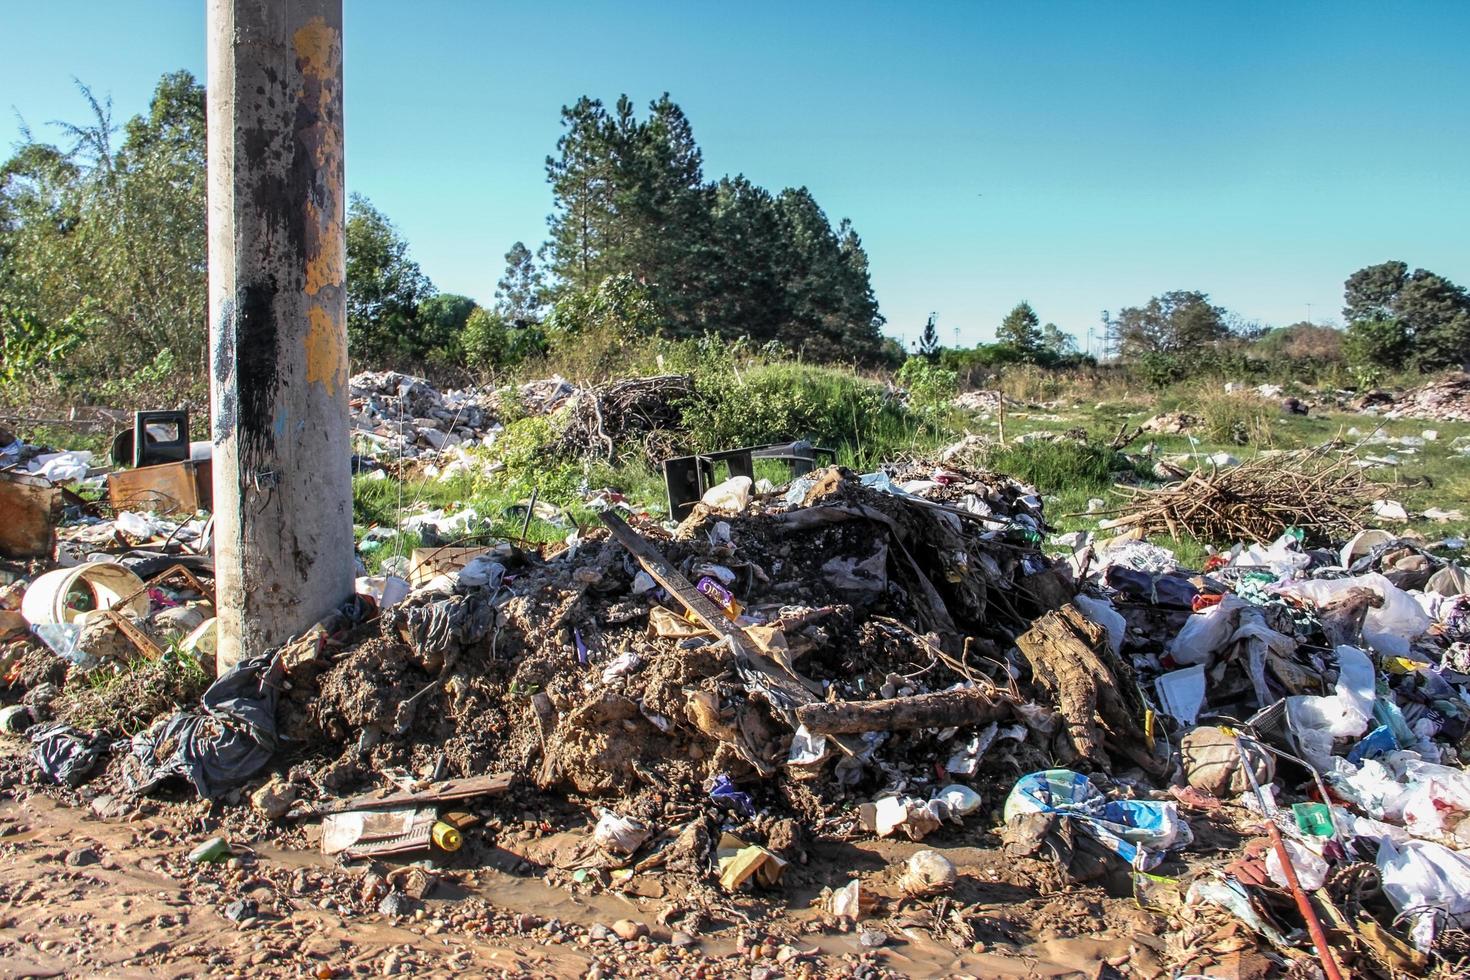 landfill with human waste that contaminates the environment photo